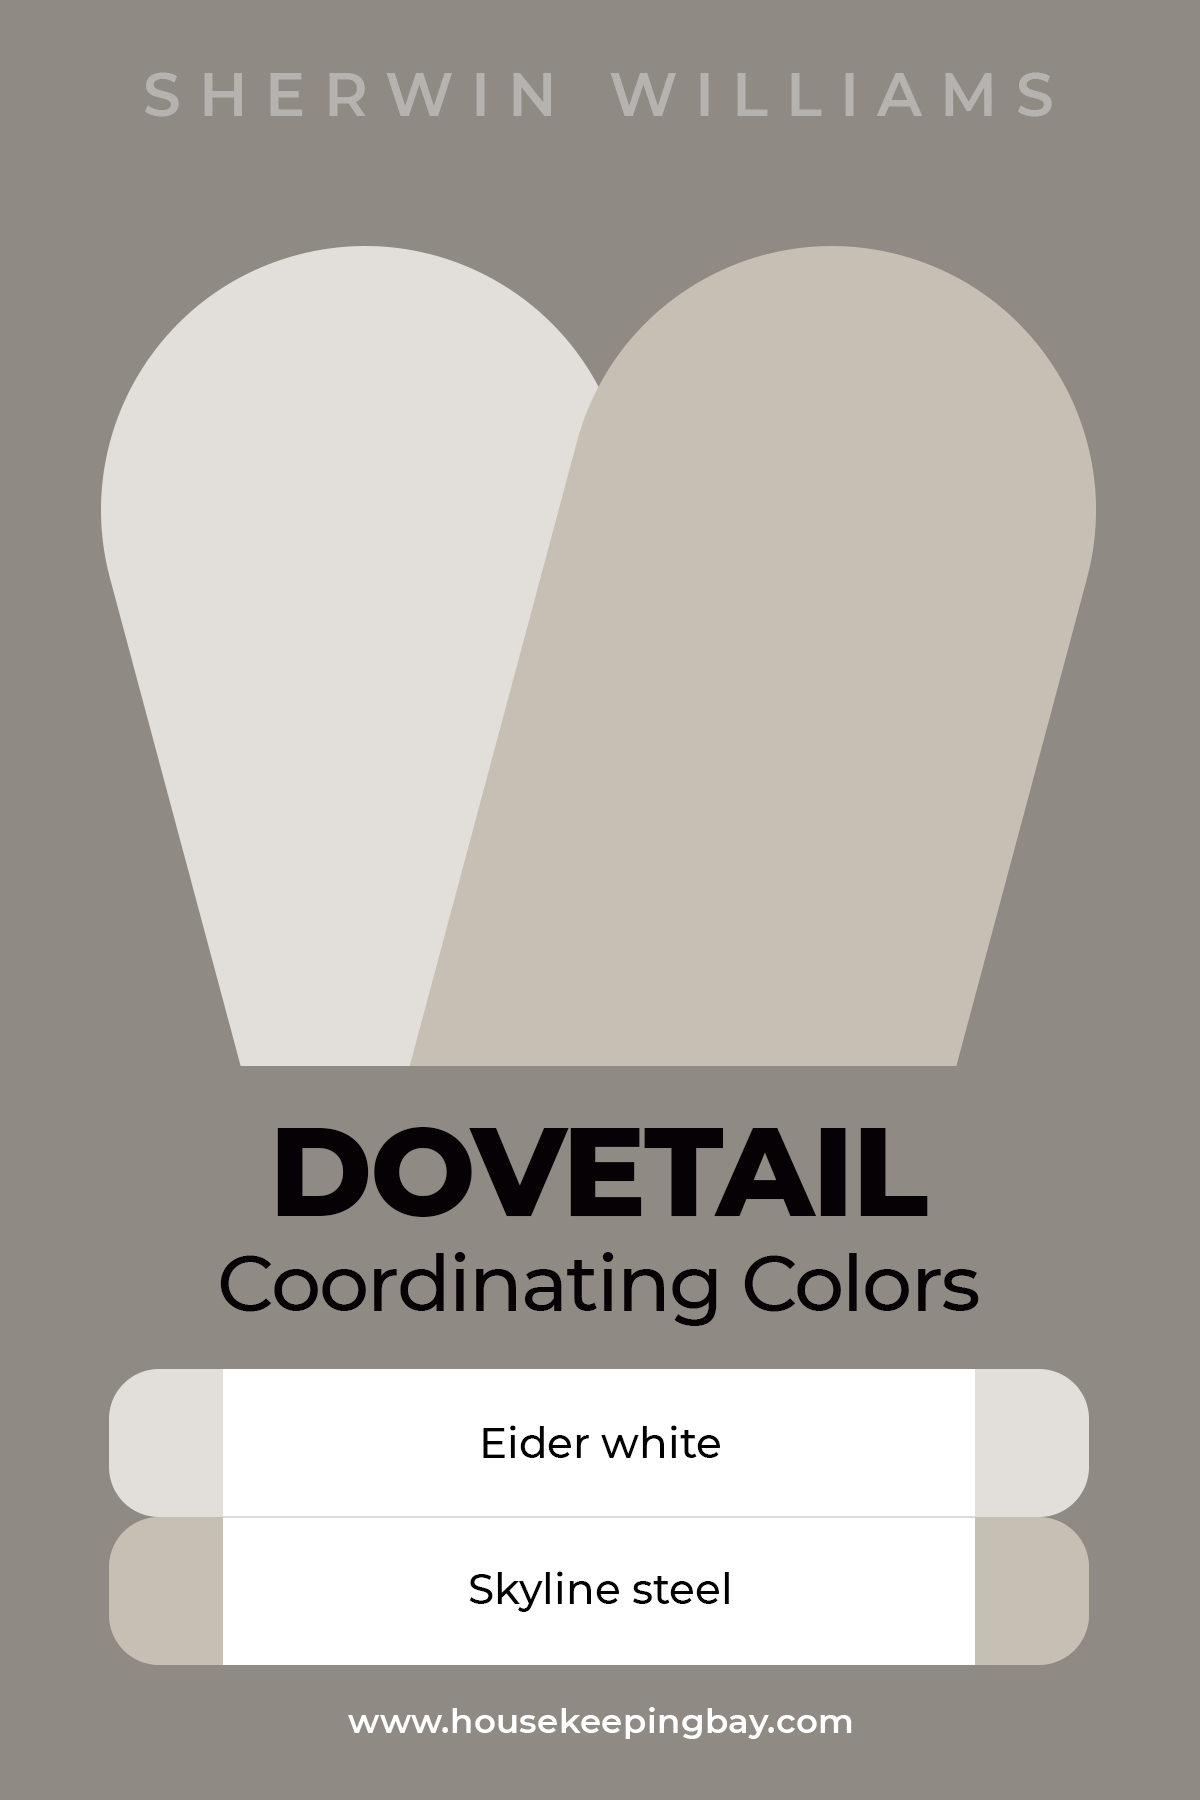 Coordinating colors for Dovetail